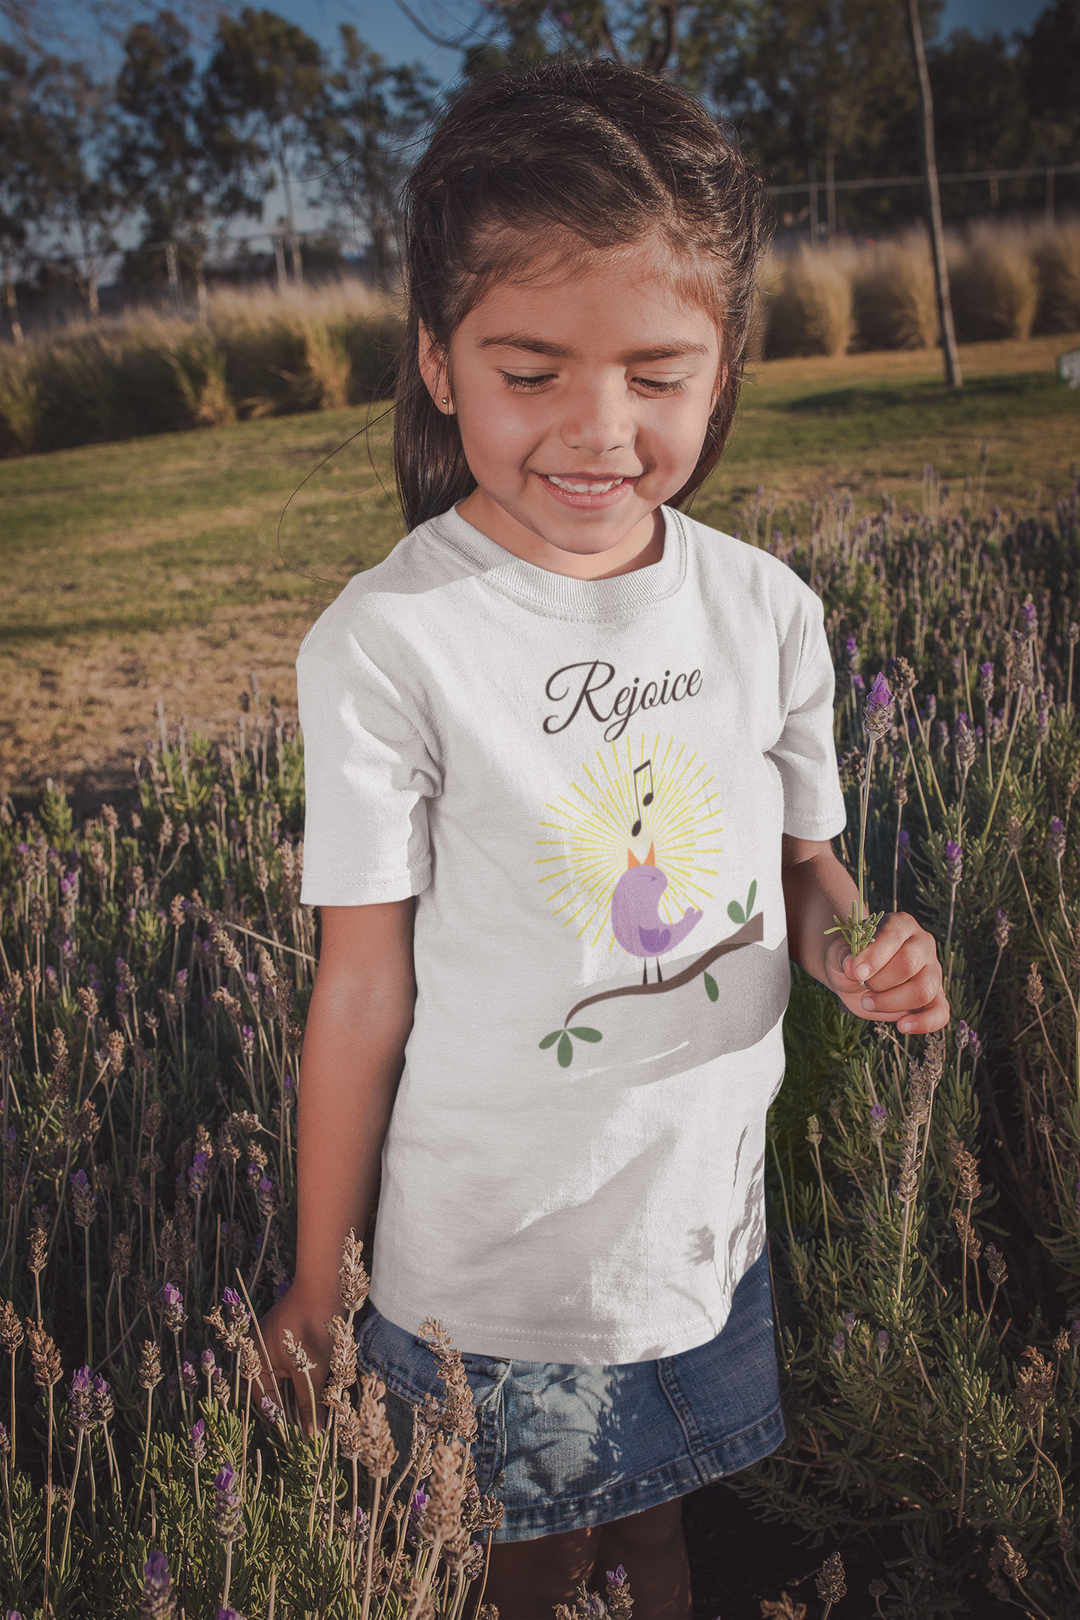 Rejoice. Gospel song graphic t shirt for toddlers and kids.